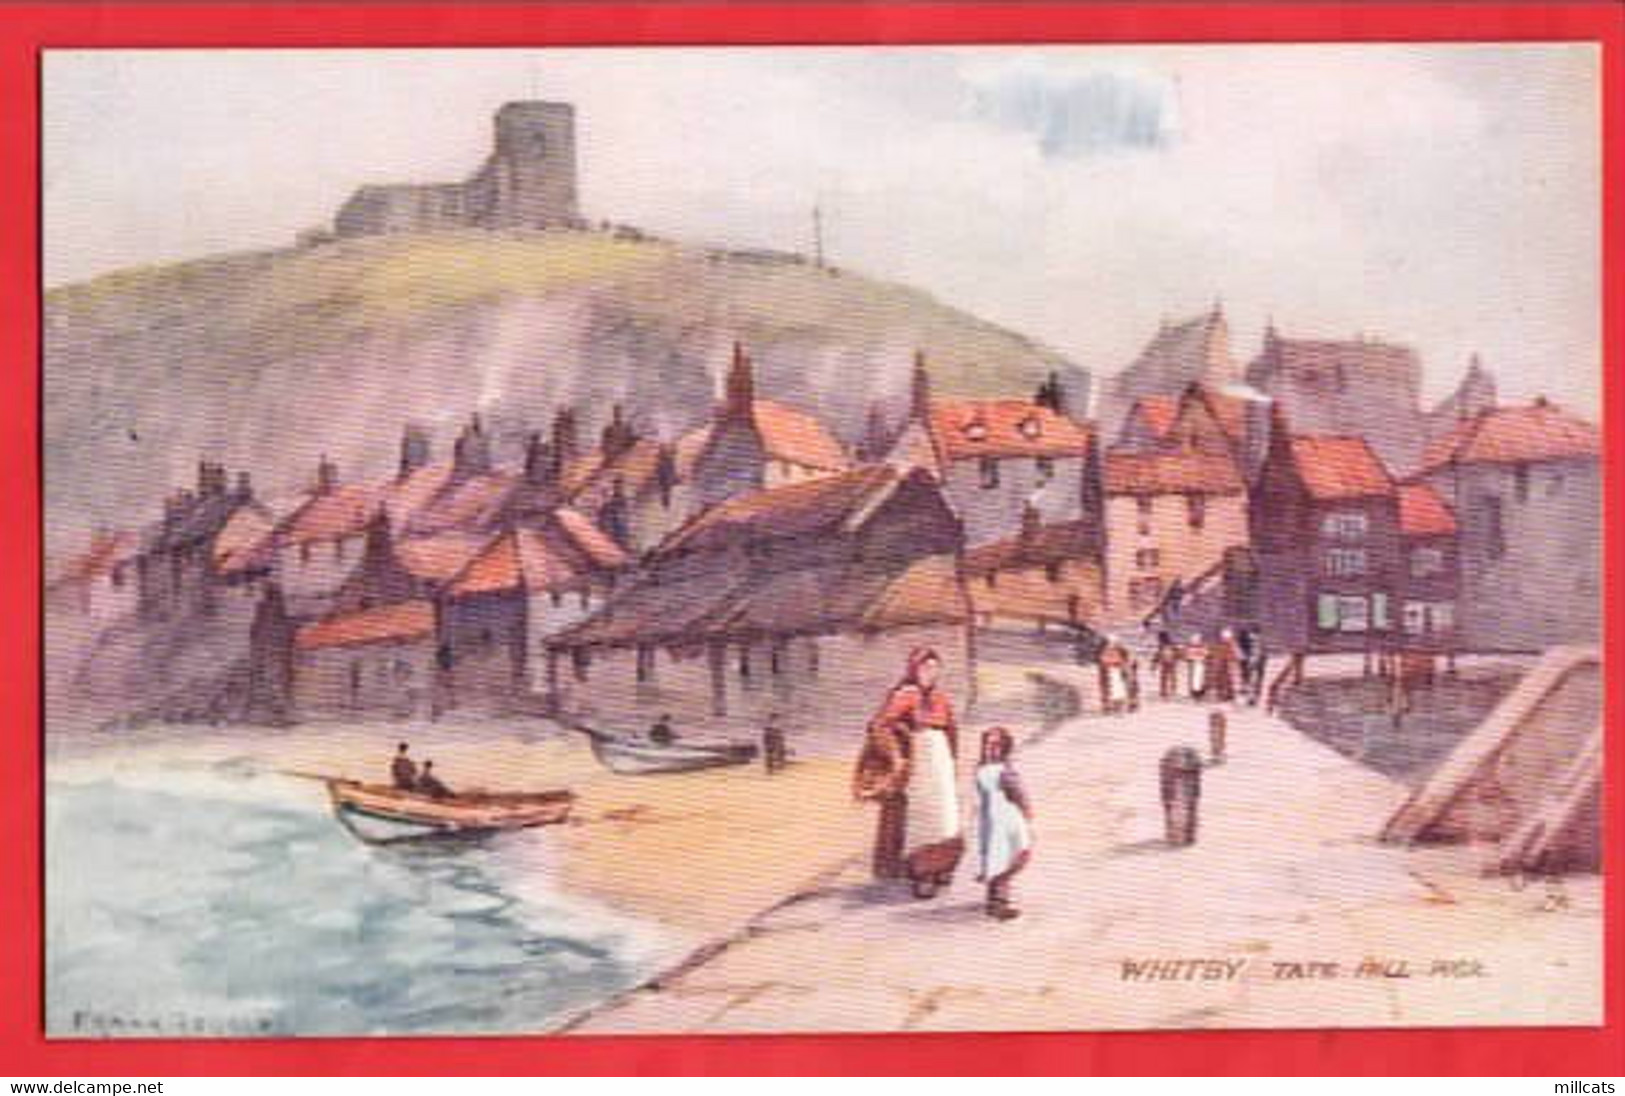 YORKSHIRE   WHITBY   TATE HILL PIER     RAPHAEL TUCK  WHITBY SERIES  ARTIST ROUSSE - Whitby